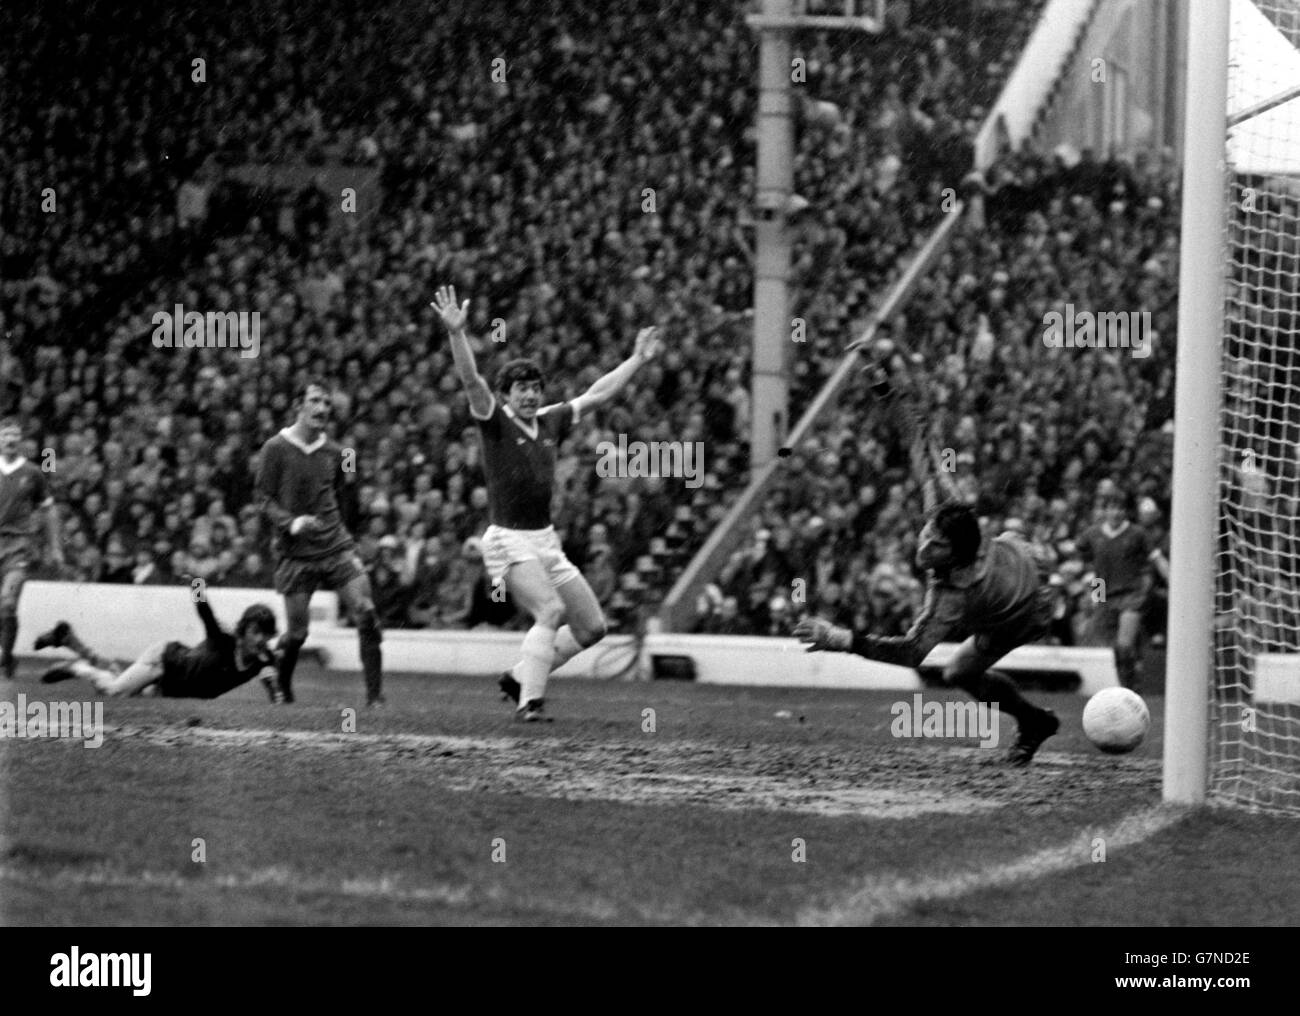 Everton substitute Bryan Hamilton (Centre) raises his arms in celebration after beating Liverpool goalkeeper Ray Clemence. The goal was disallowed for offside, and the match ended in a 2-2 draw. Stock Photo